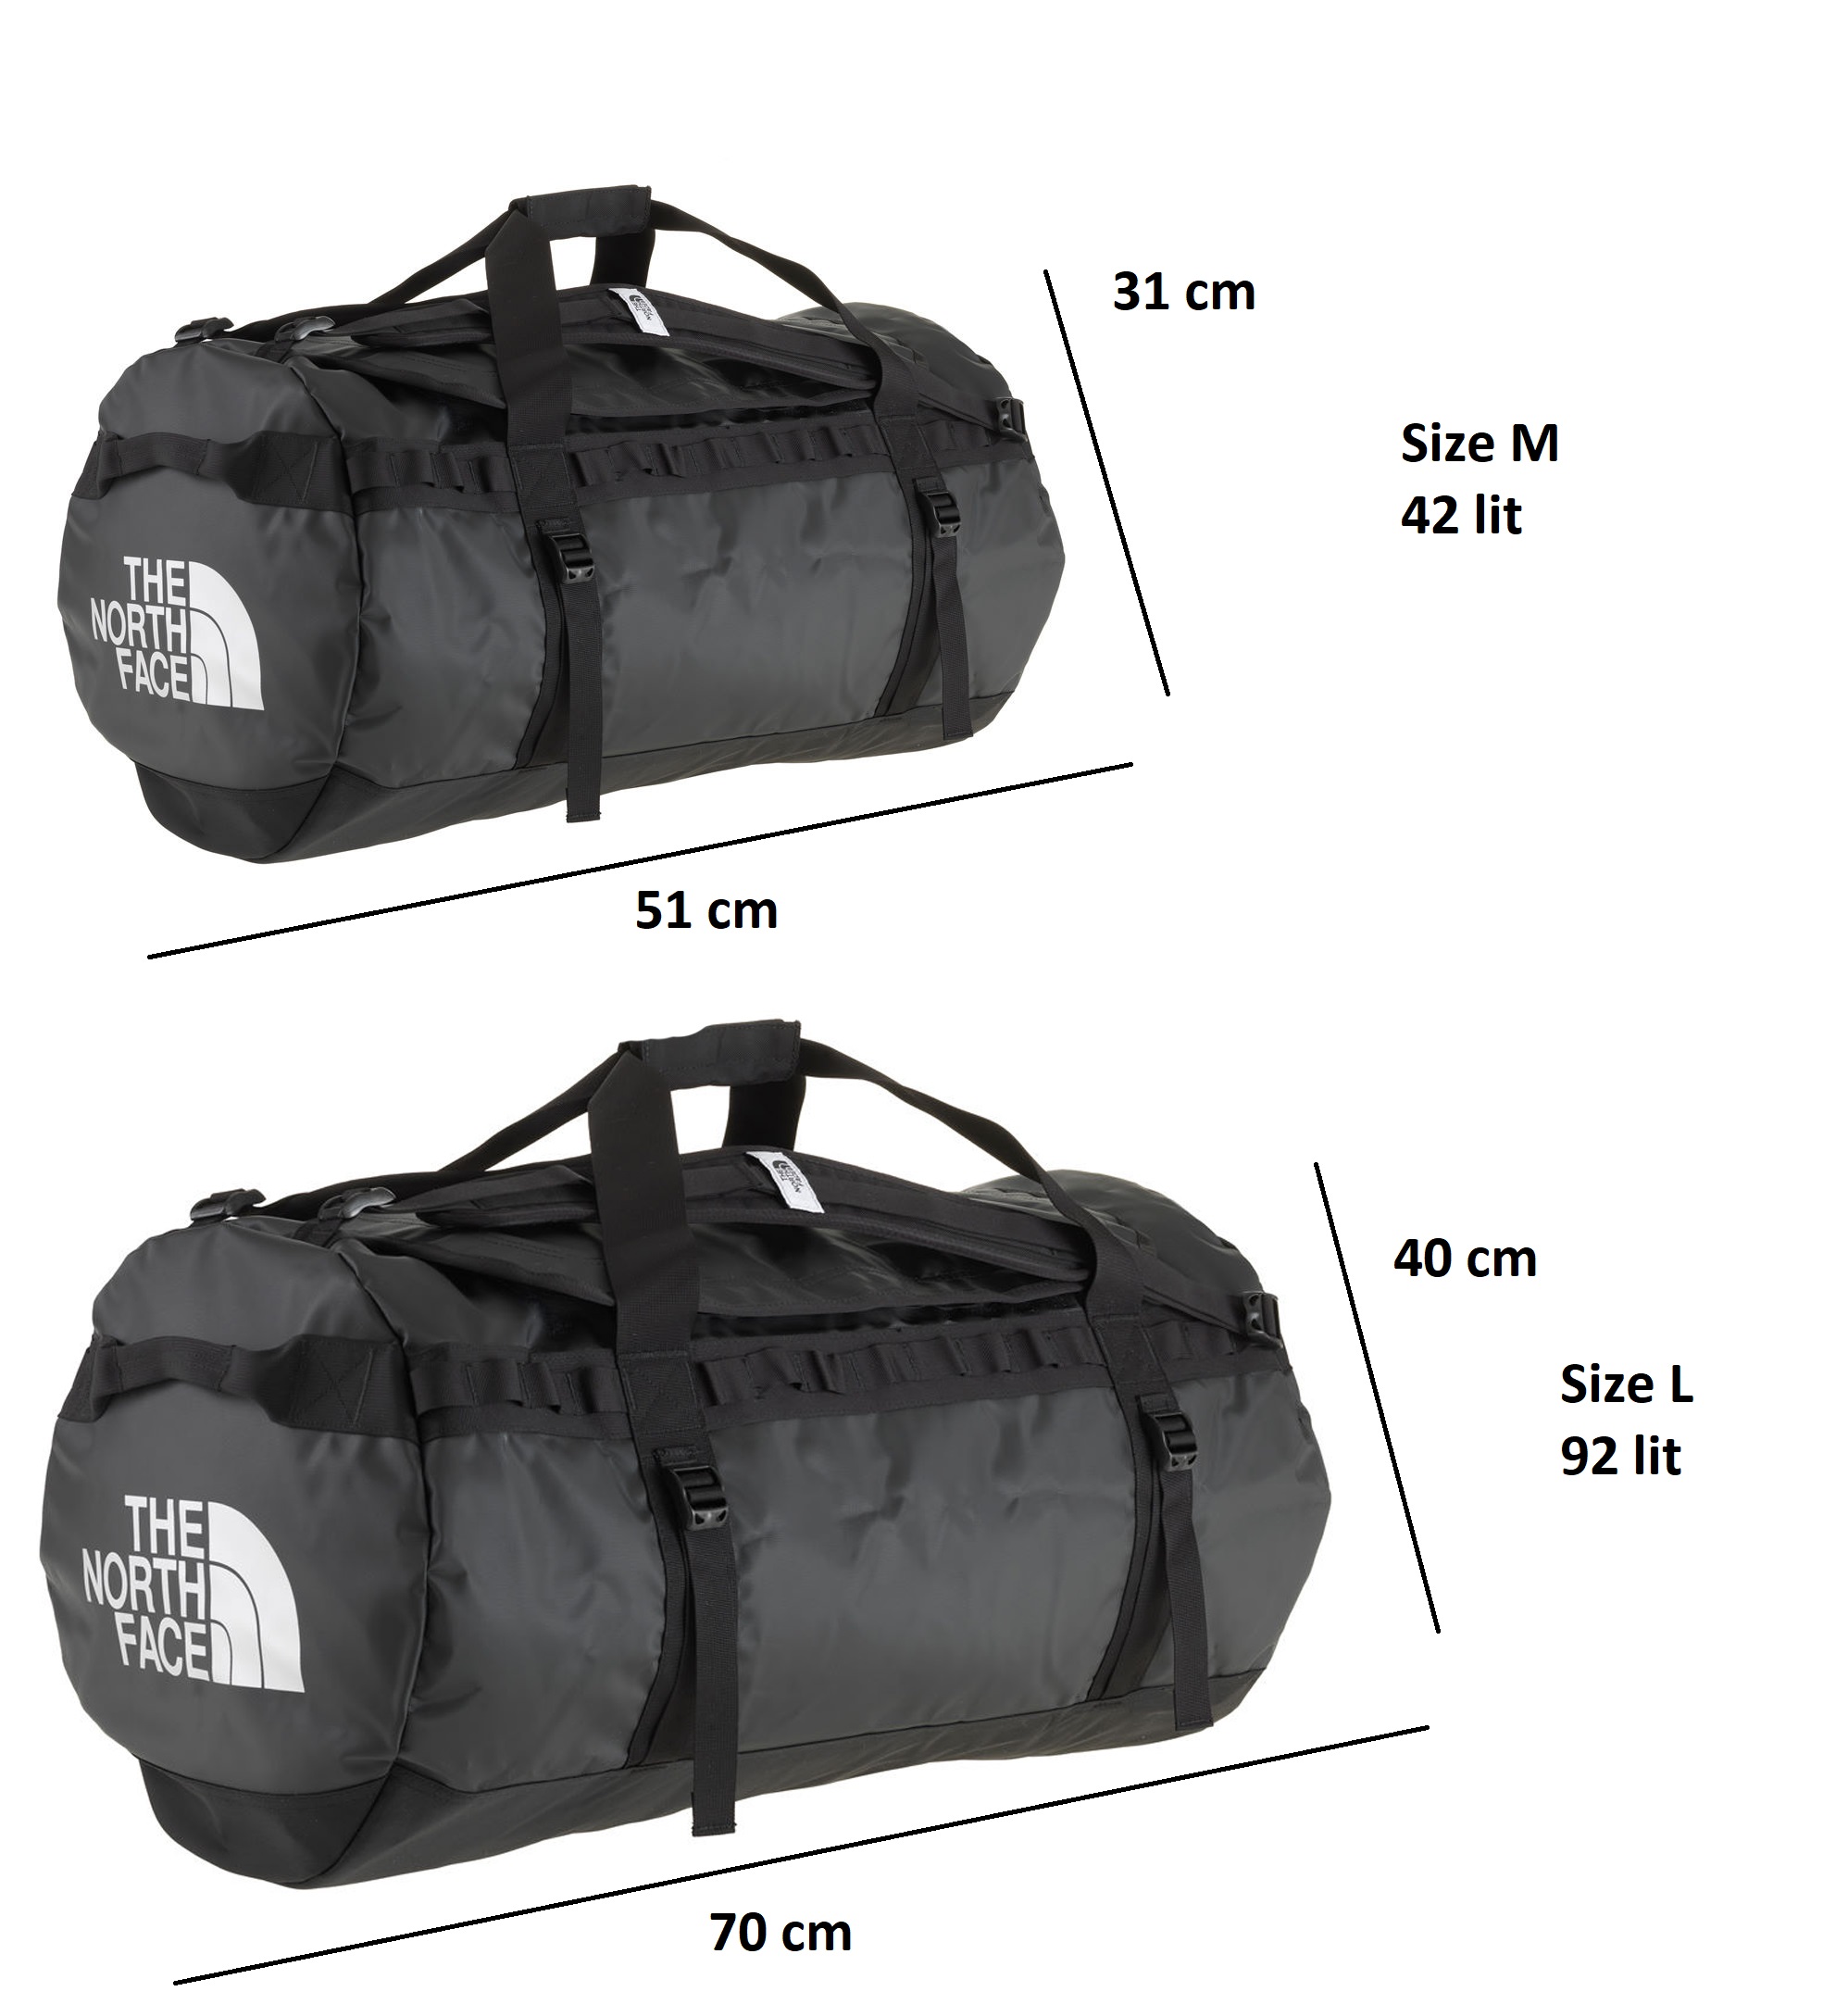 North Star Sports Gear Duffle Bag camping sports moving travel luggage  LARGE NEW | eBay